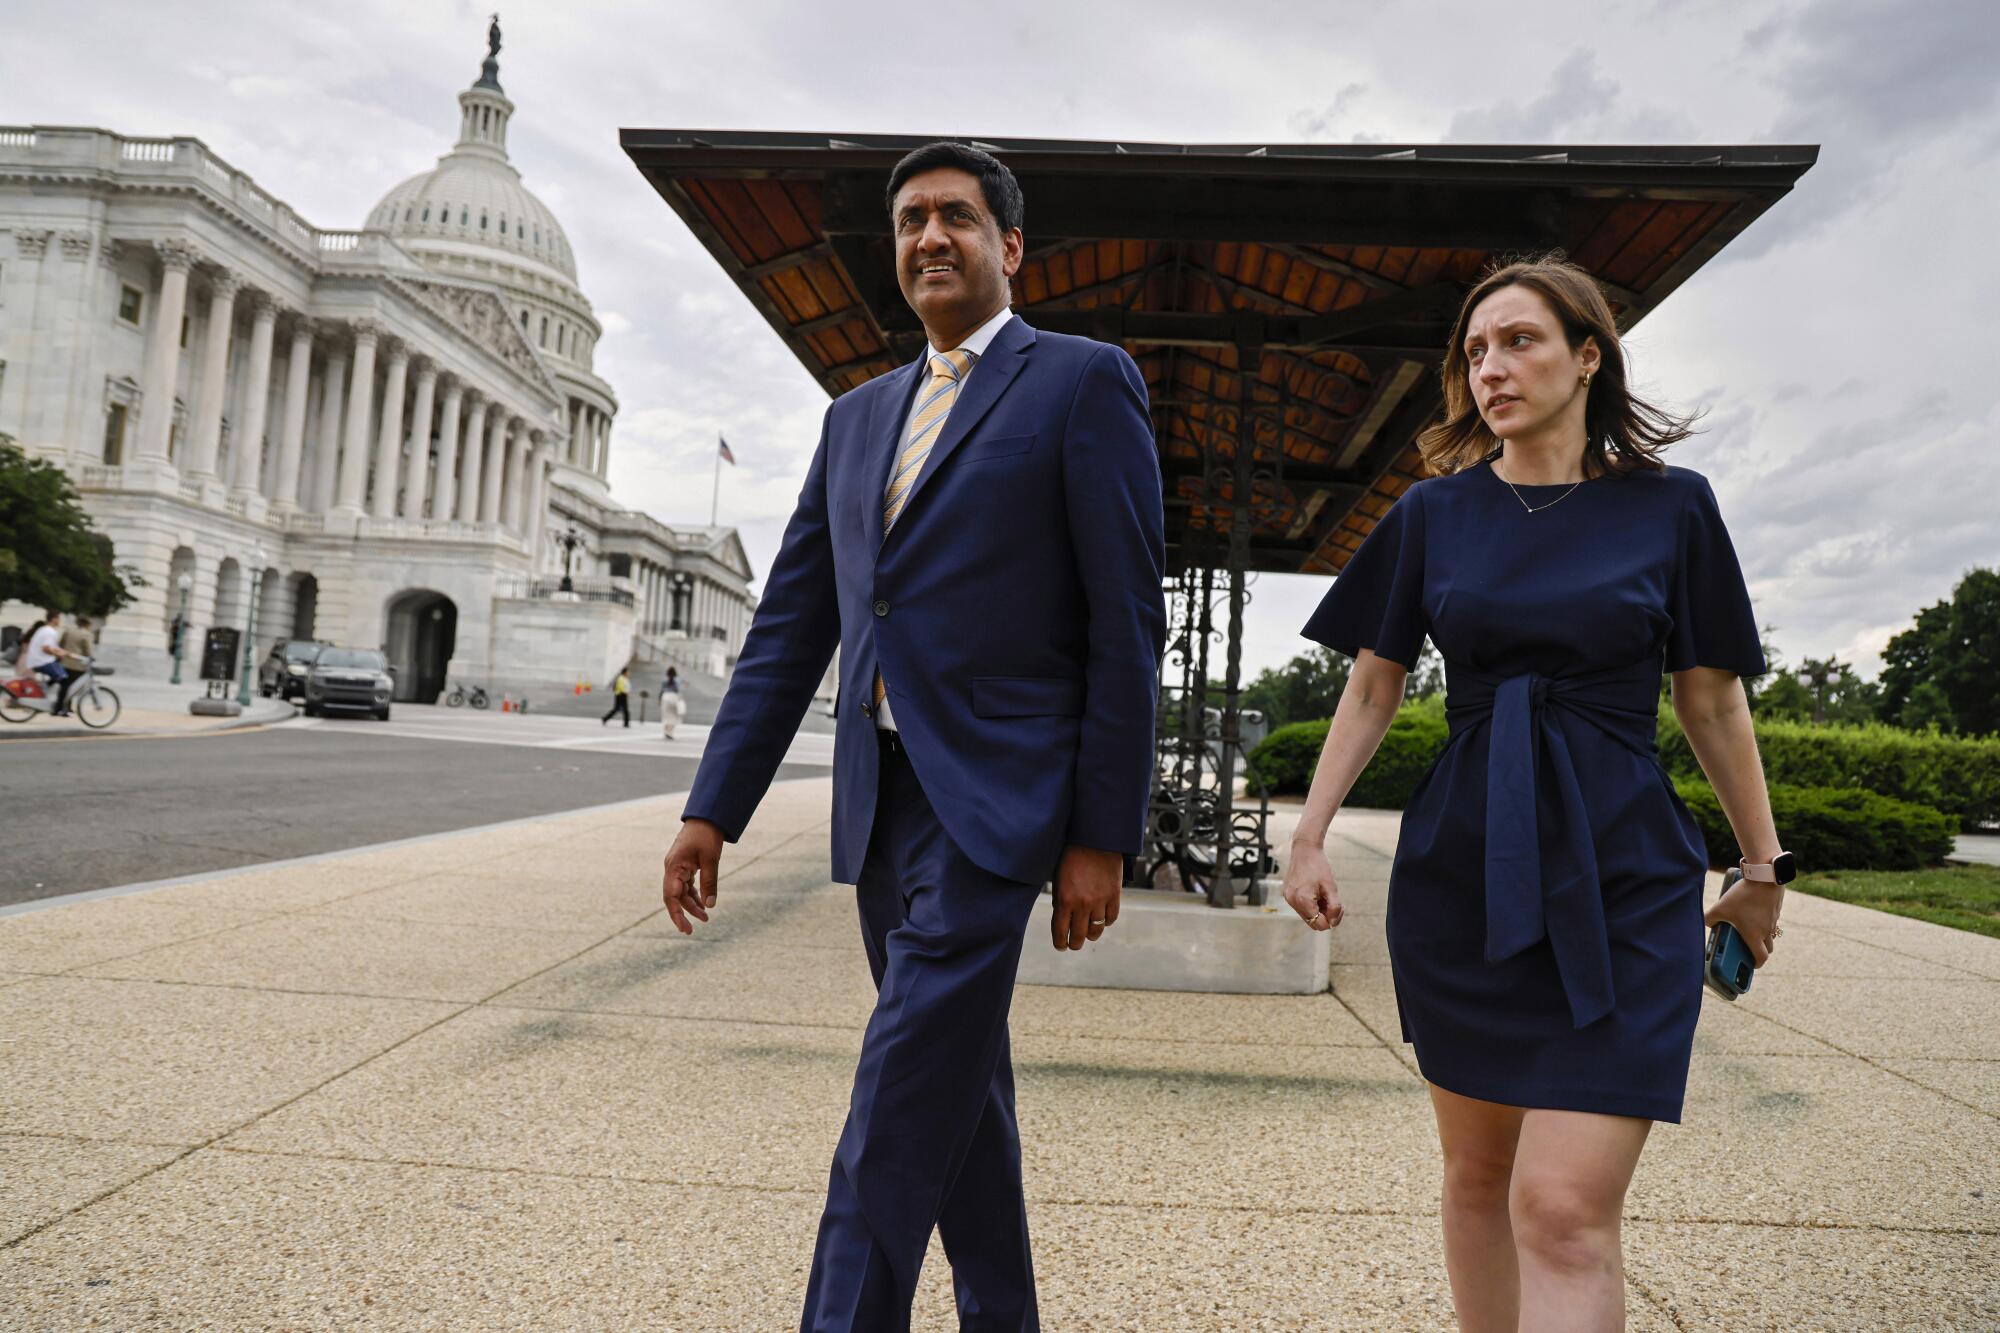 Rep. Ro Khanna, left, and aide Marie Baldassarre walking near the U.S. Capitol under a cloudy sky